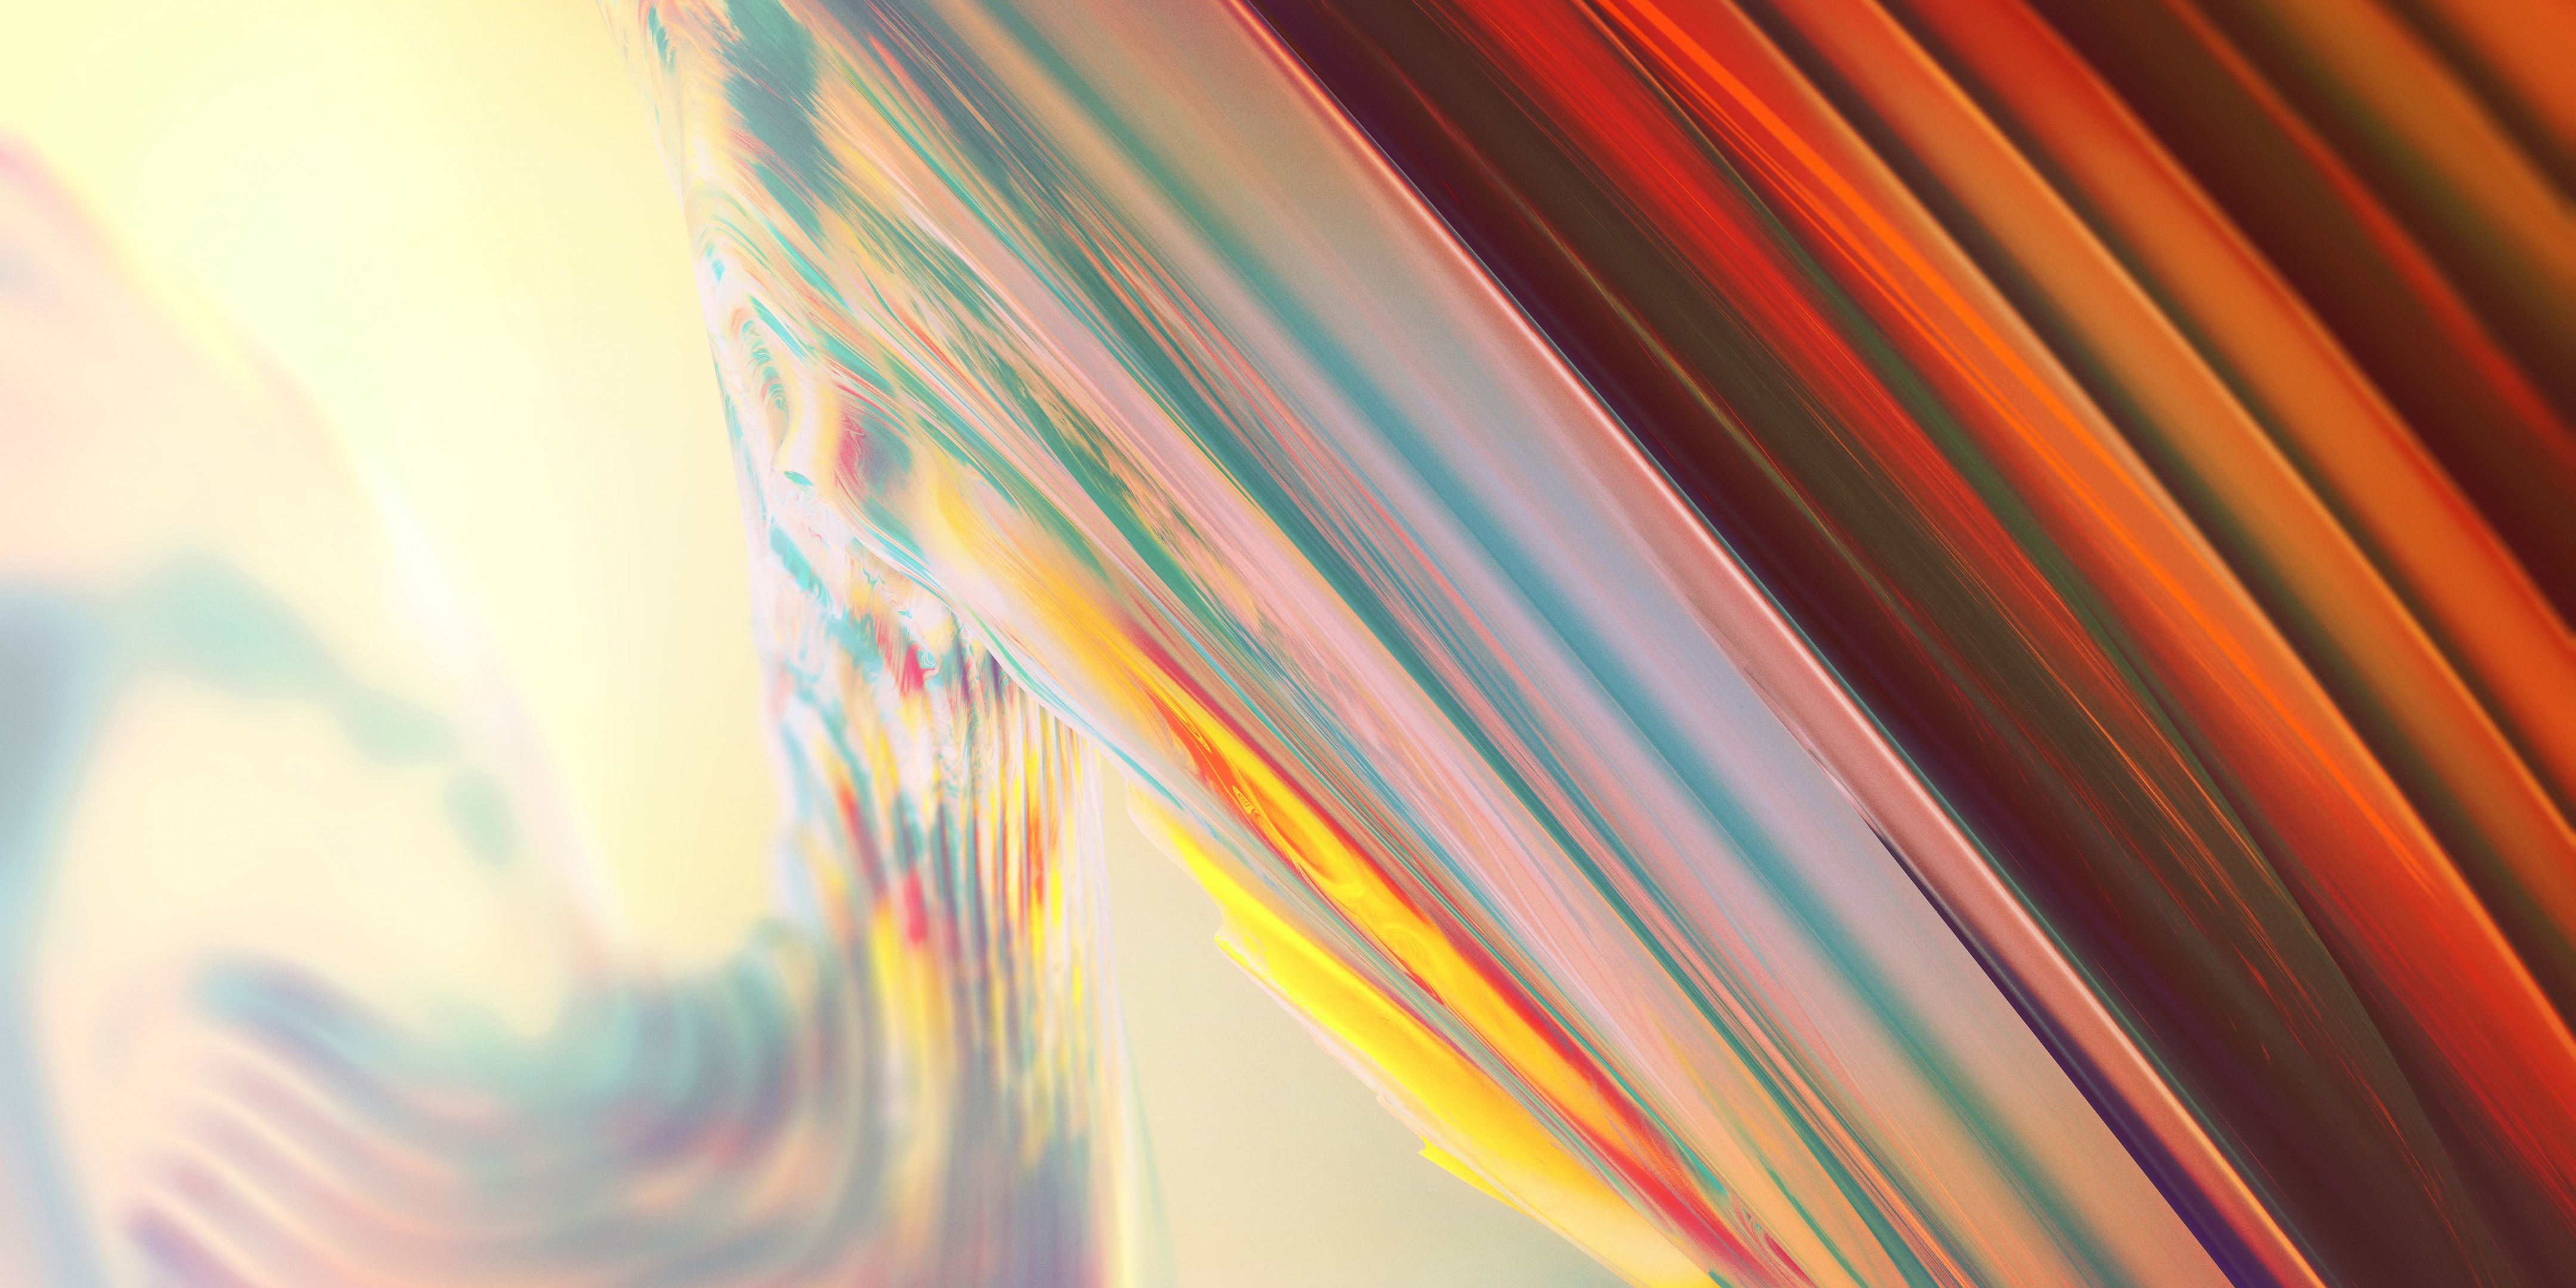 Waves Abstraction Colored Lines 4k Wallpaper and Free Stock